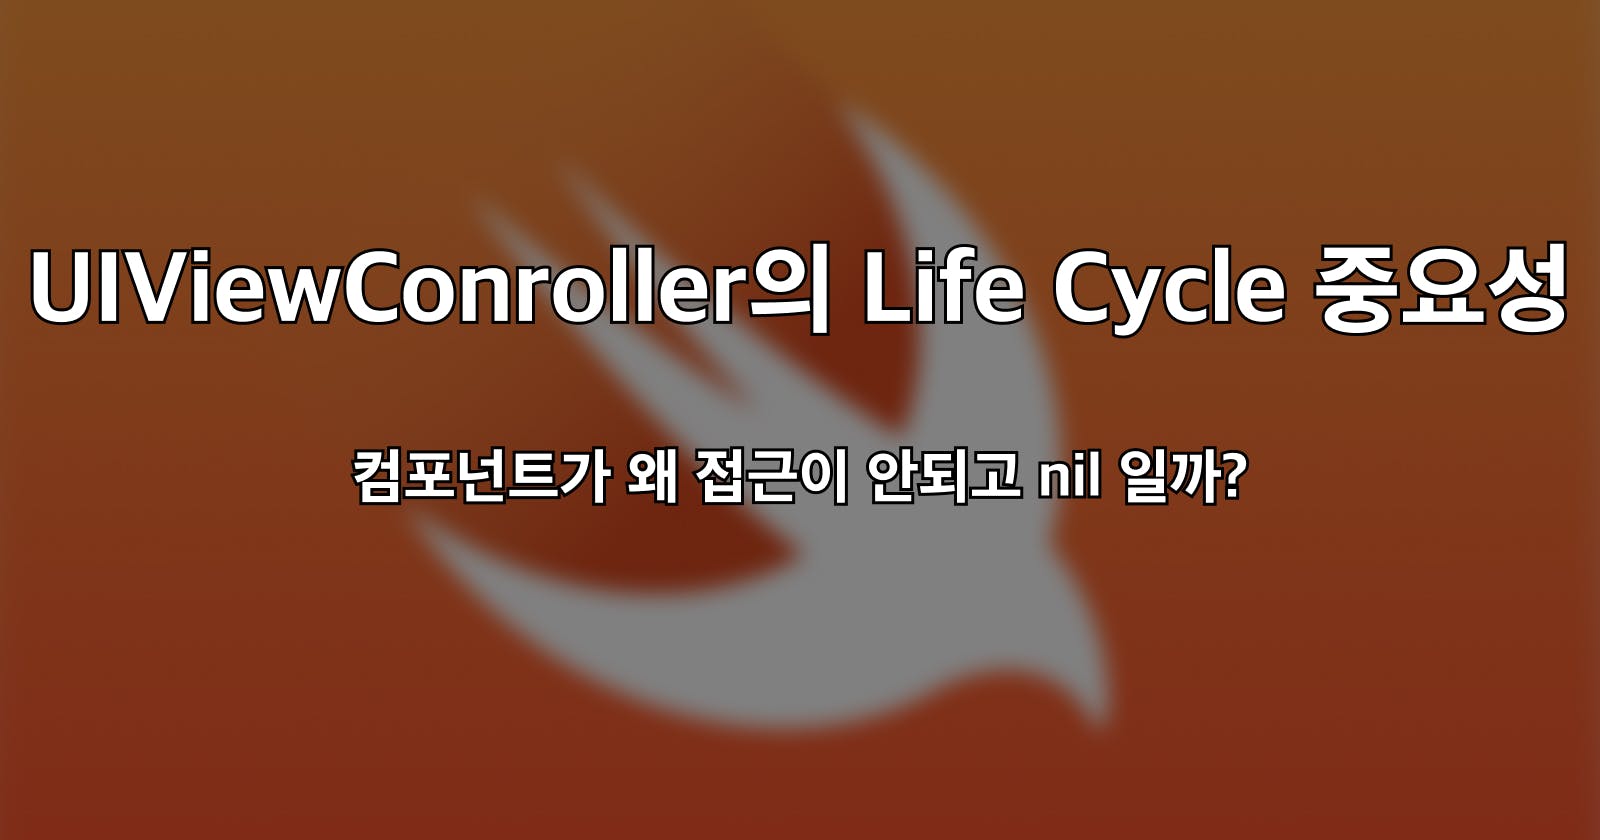 UIViewController의 Life Cycle의 중요성 ( feat. @IBOutlet)